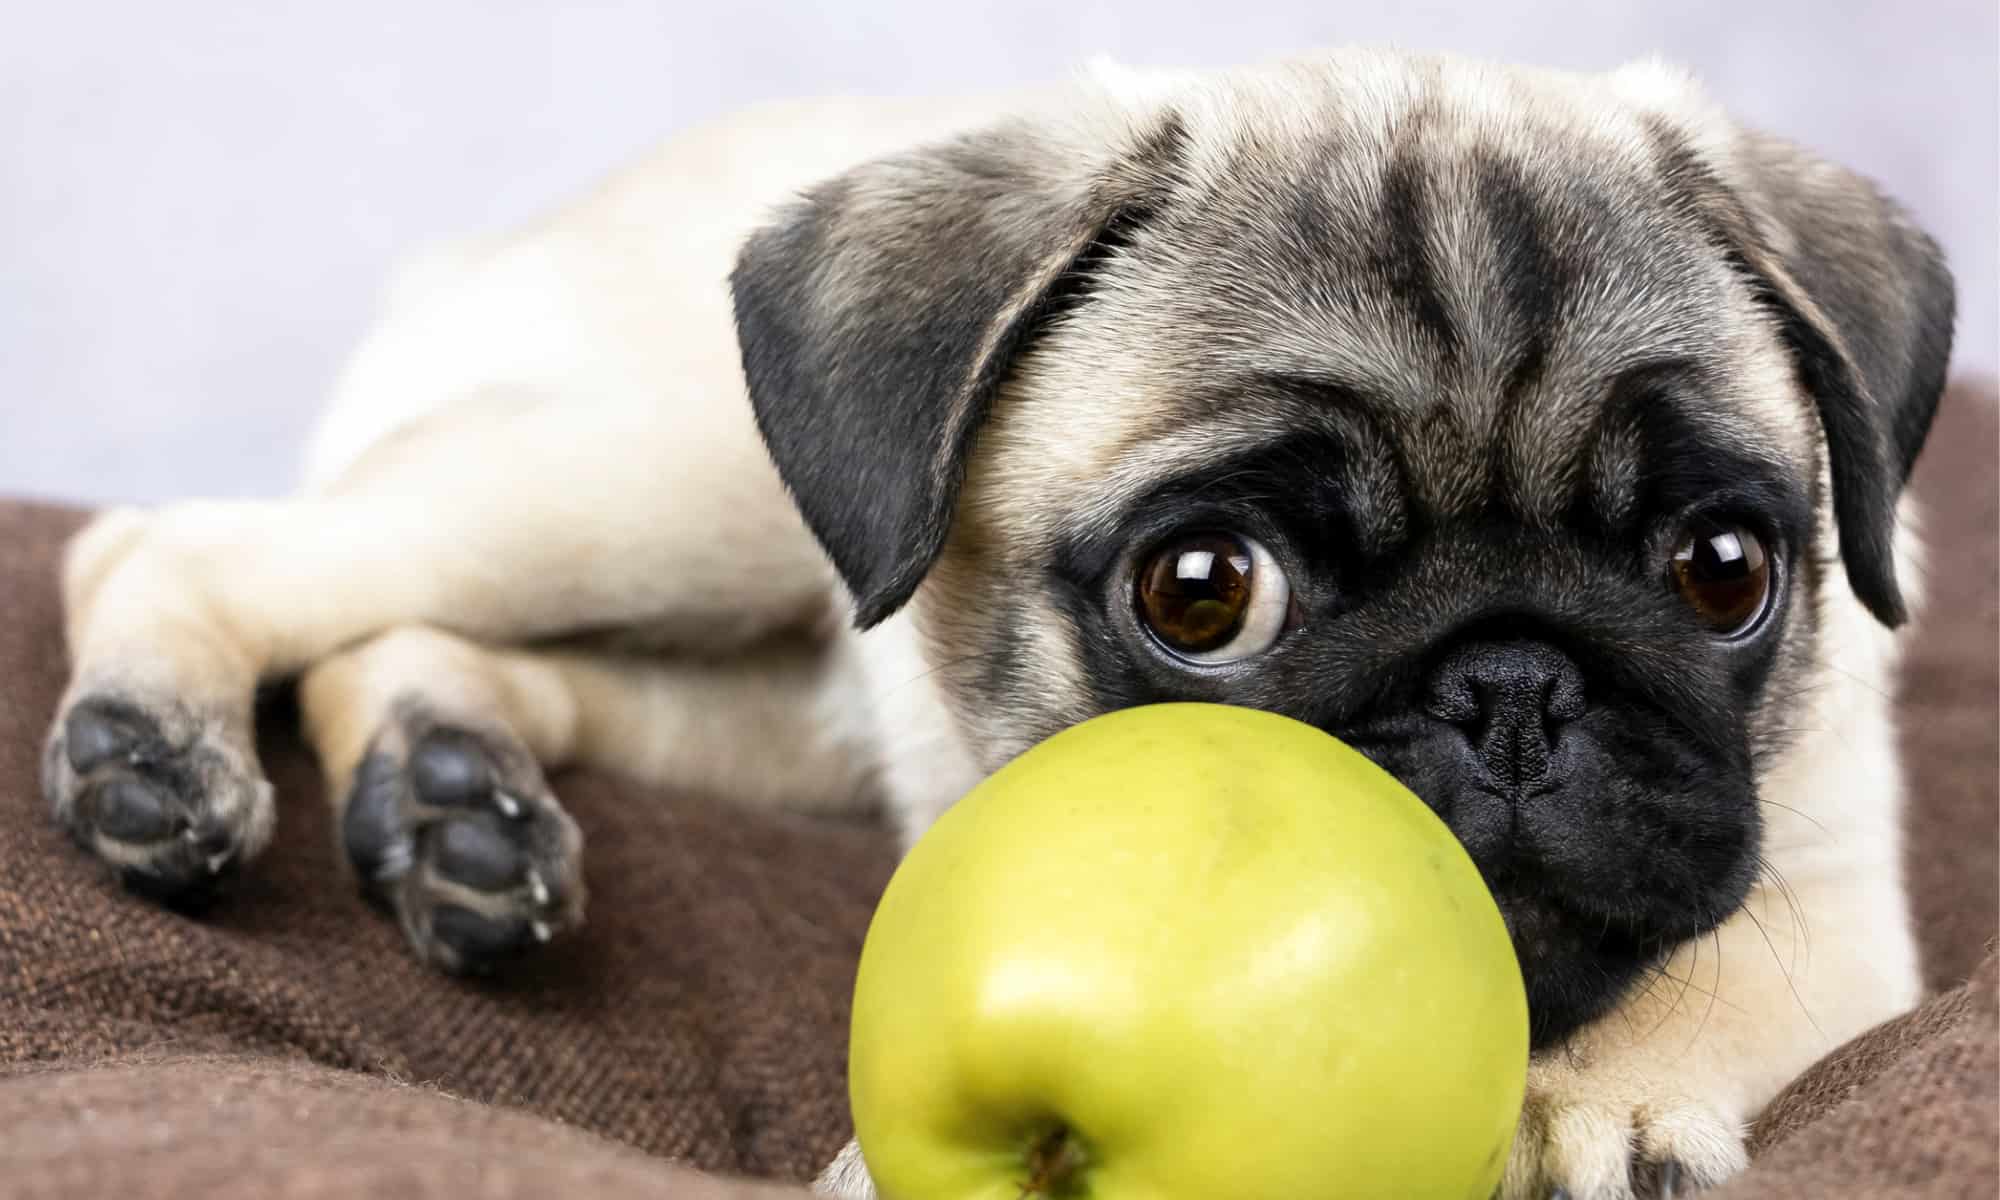 what kind of apples do dogs like